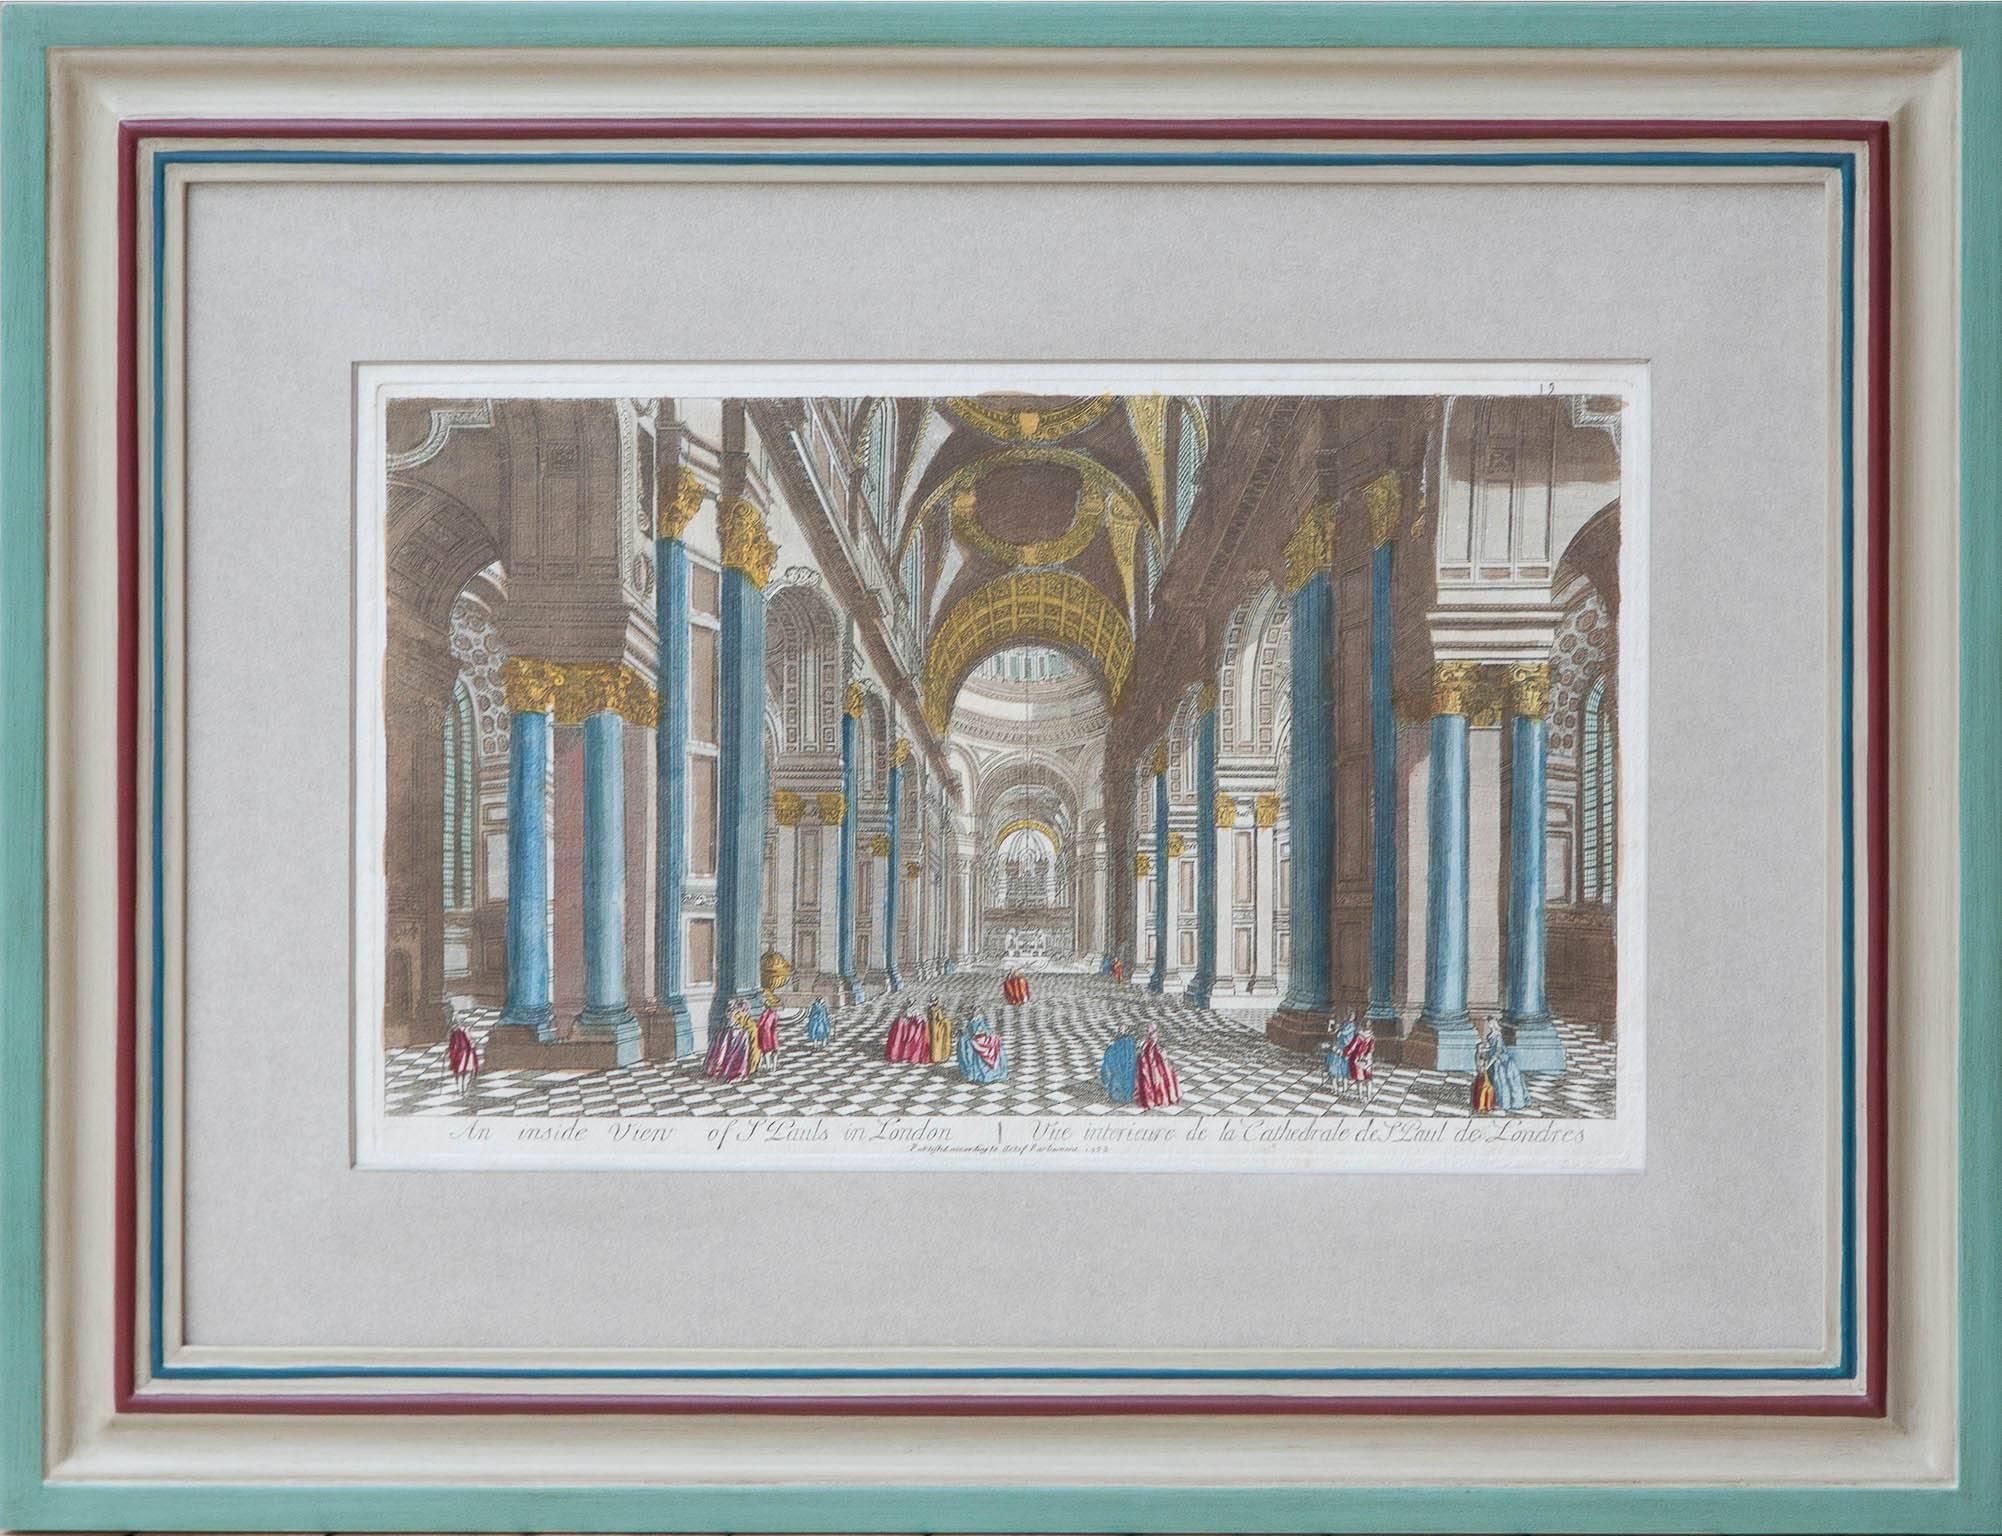 A set of 12 framed Vue D'Optiques in handmade gessoed and painted frames. With ivory colored mounts.

Views of Florence, Italy, St Petersburg, Russia, St Paul's, London, Spain, Rome, bullfighting in Madrid, and the Pantheon.